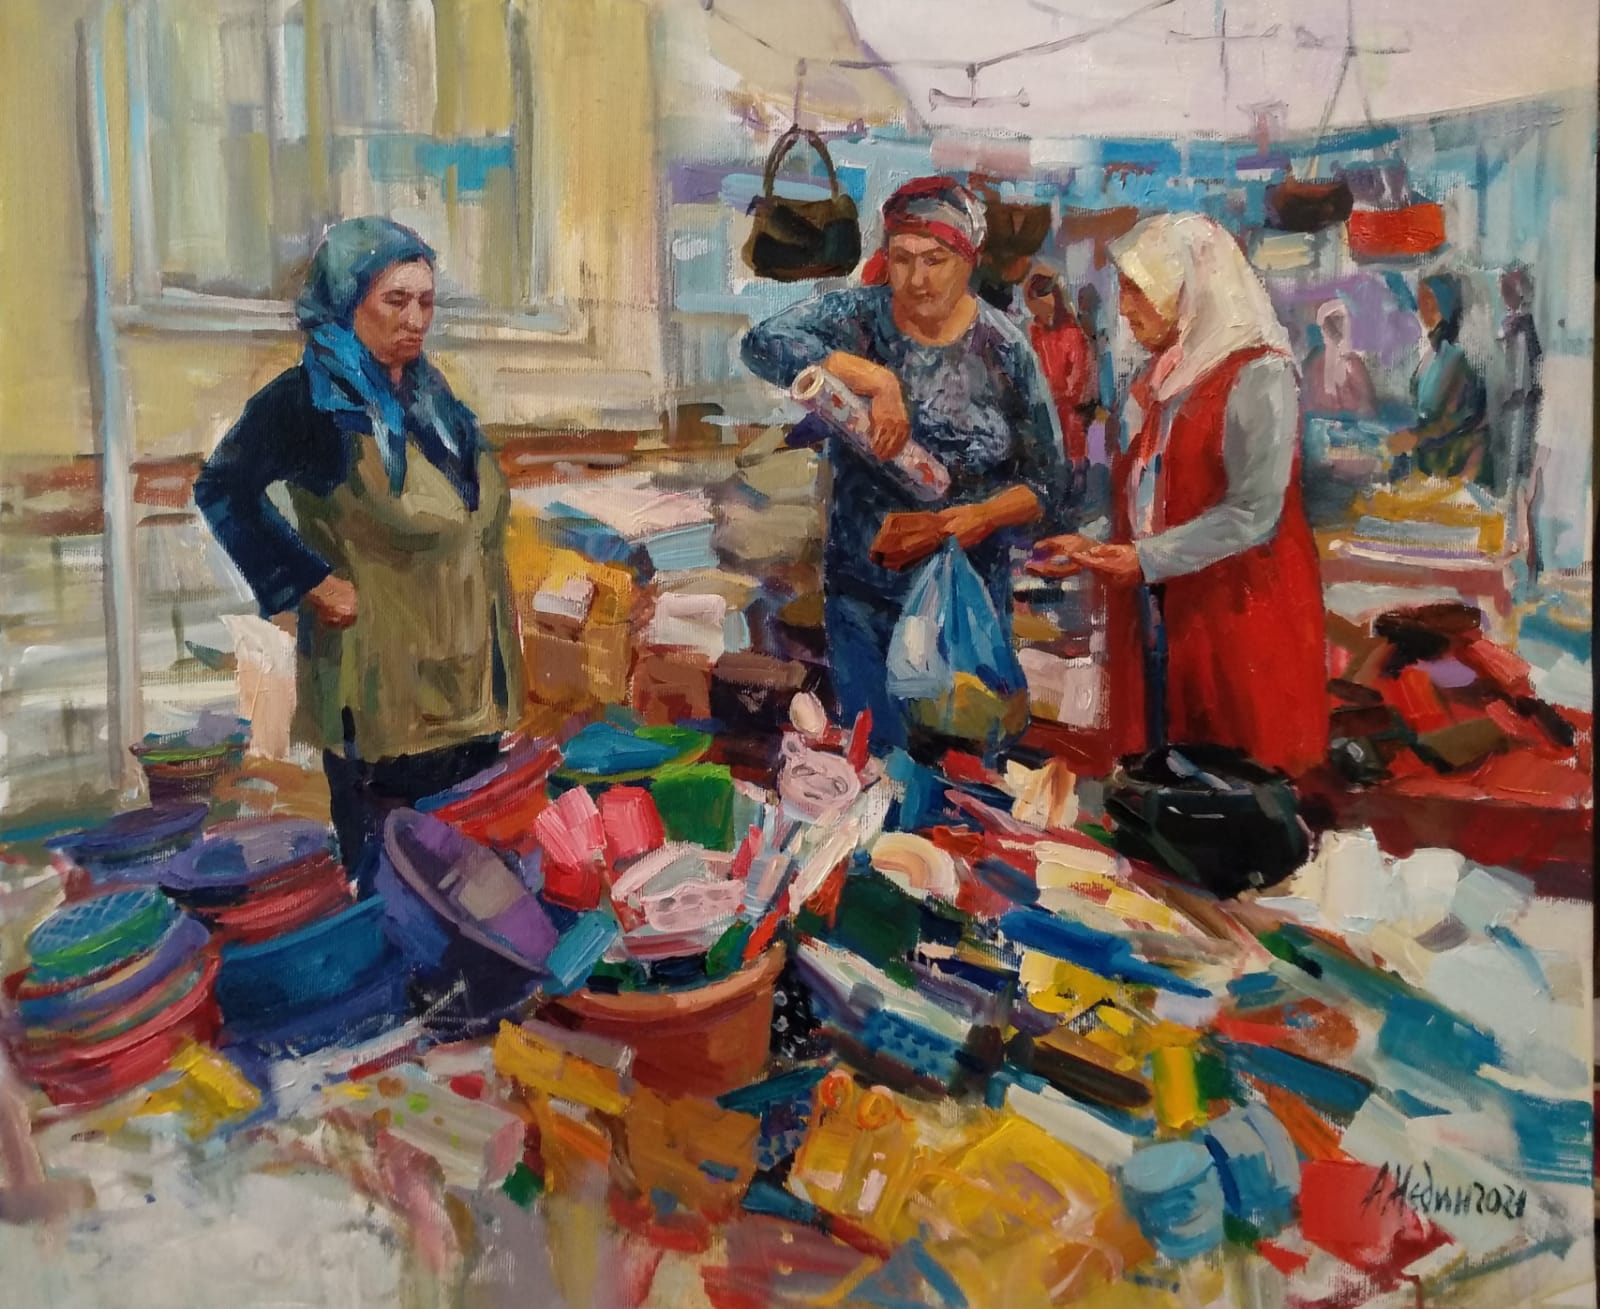 "On the Market in Turkey" Figural Composition Painting Angelina Nedin 2021